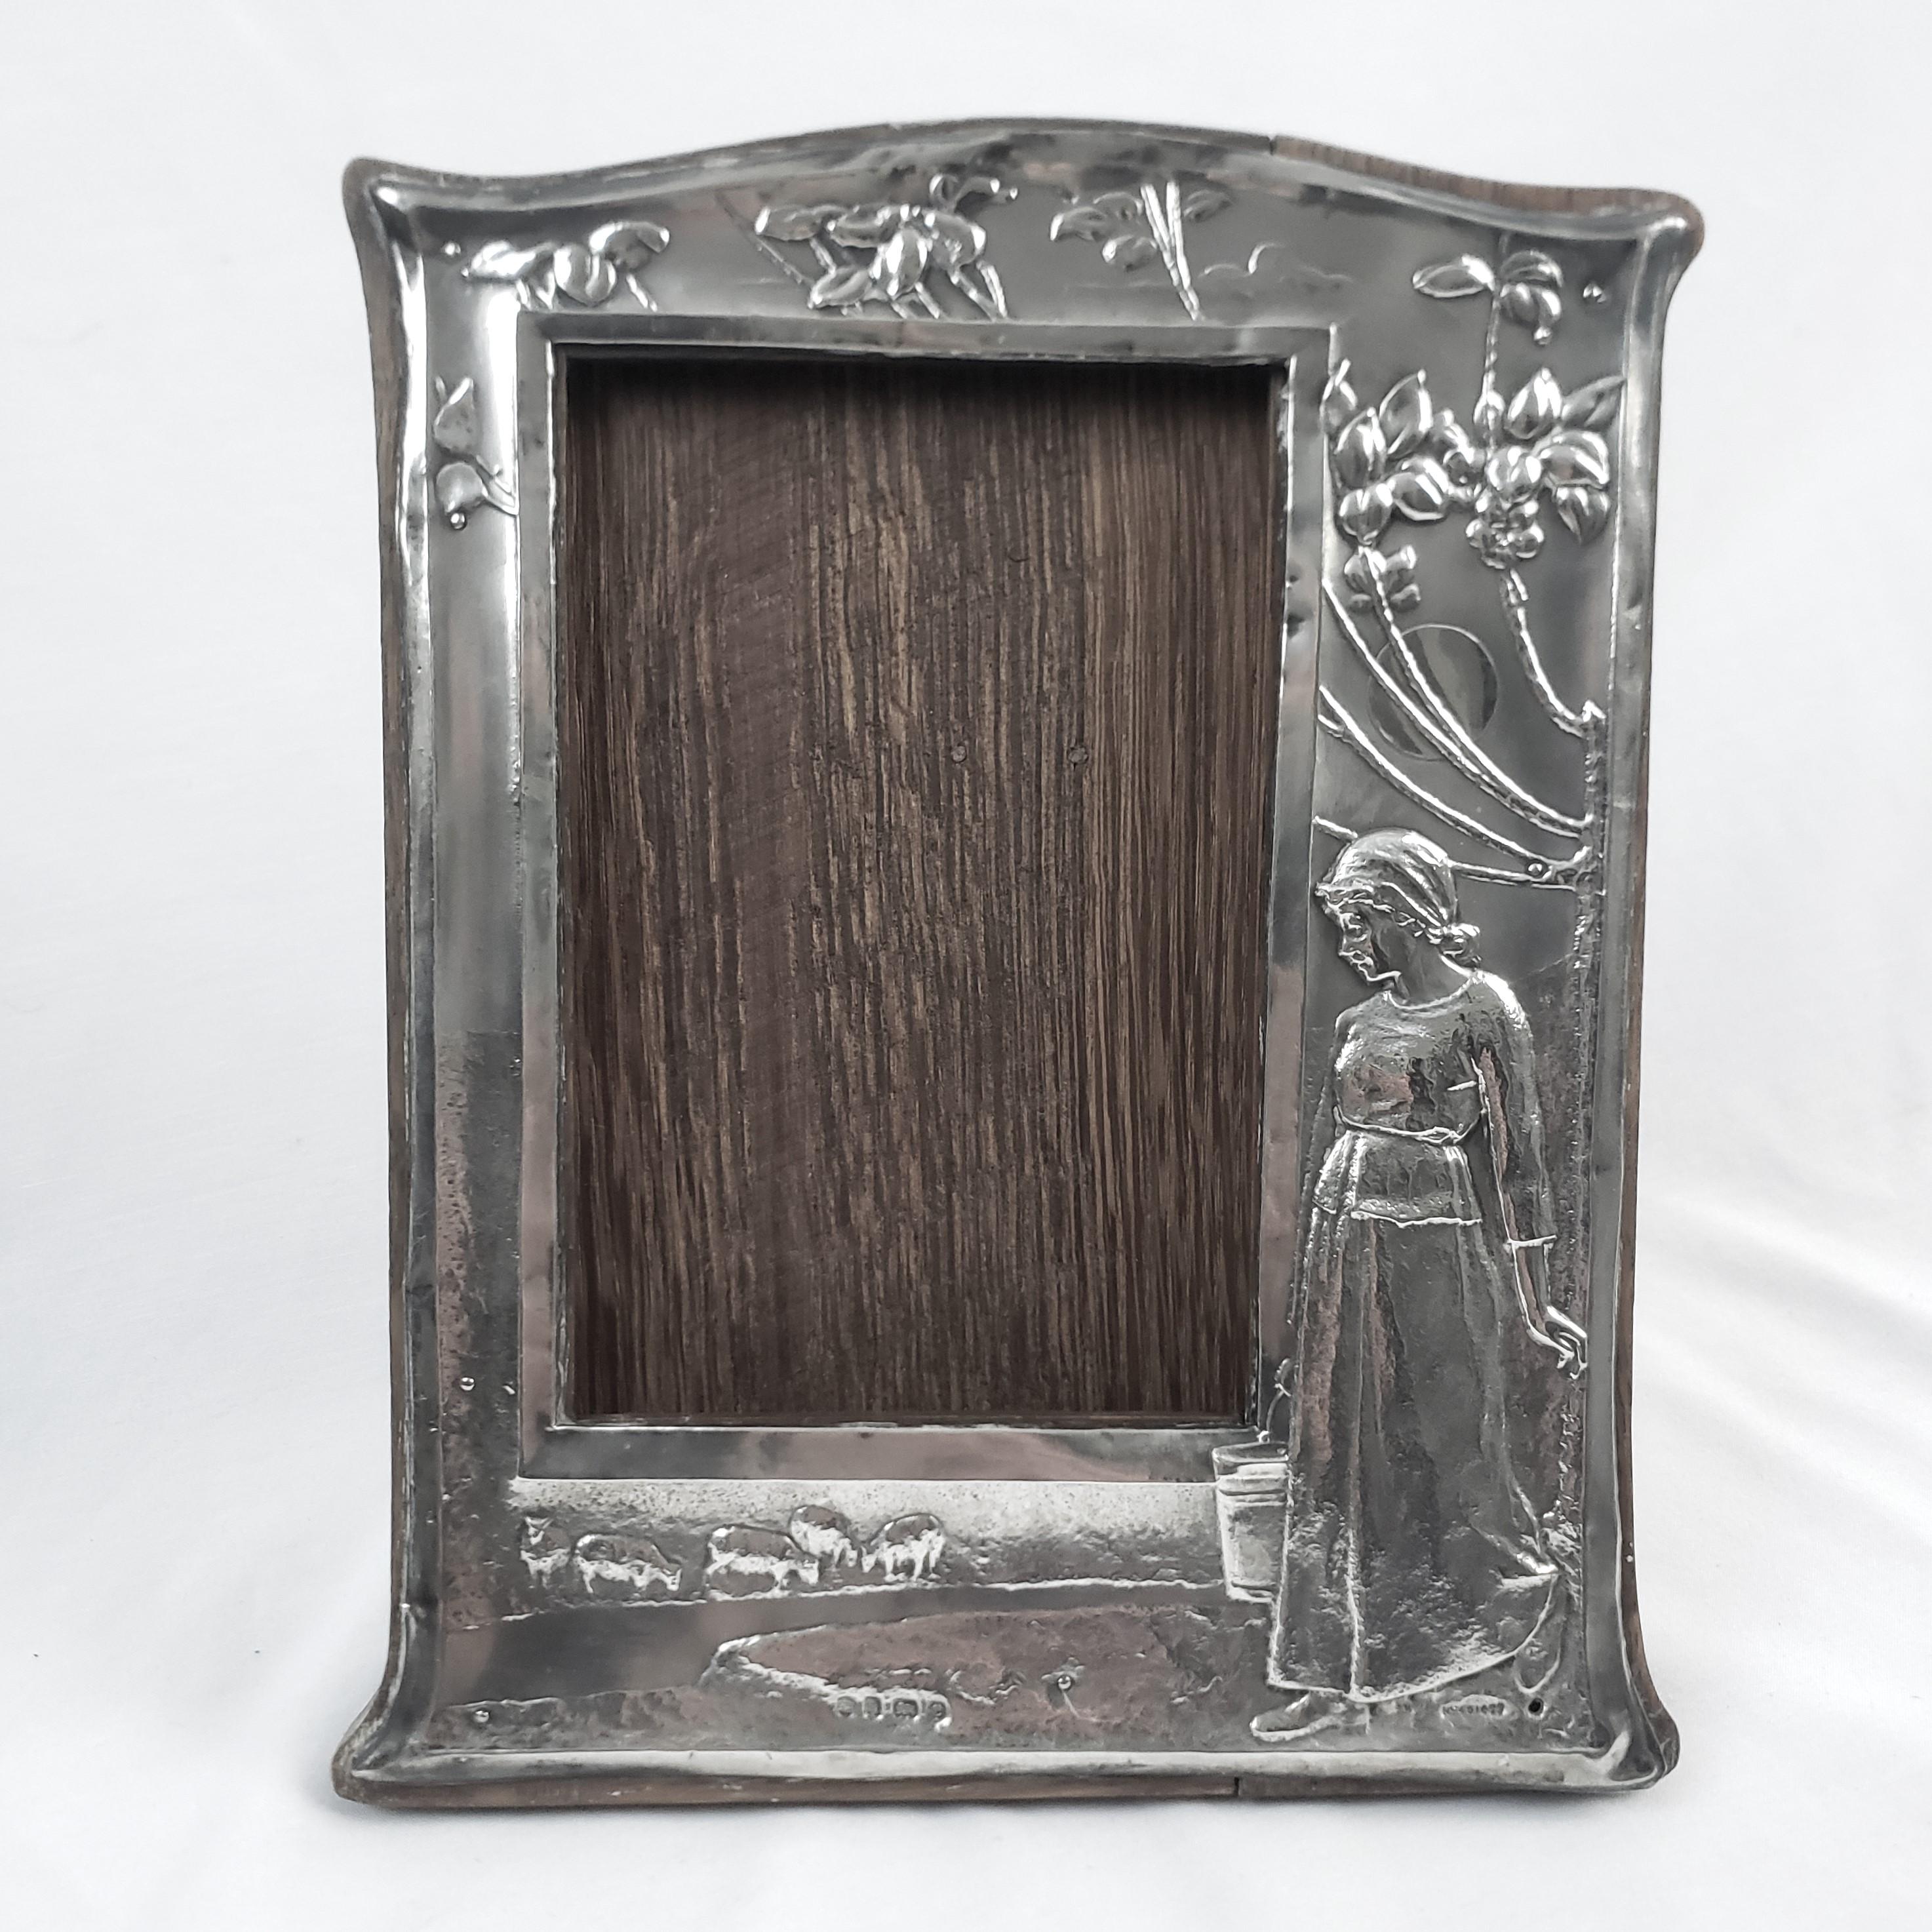 This antique picture or mirror frame was made by the well known Charles S. Green Company of England in approximately 1907 in the period Arts and Crafts style. The front of the frame is composed of sterling silver with repousse decoration depicting a